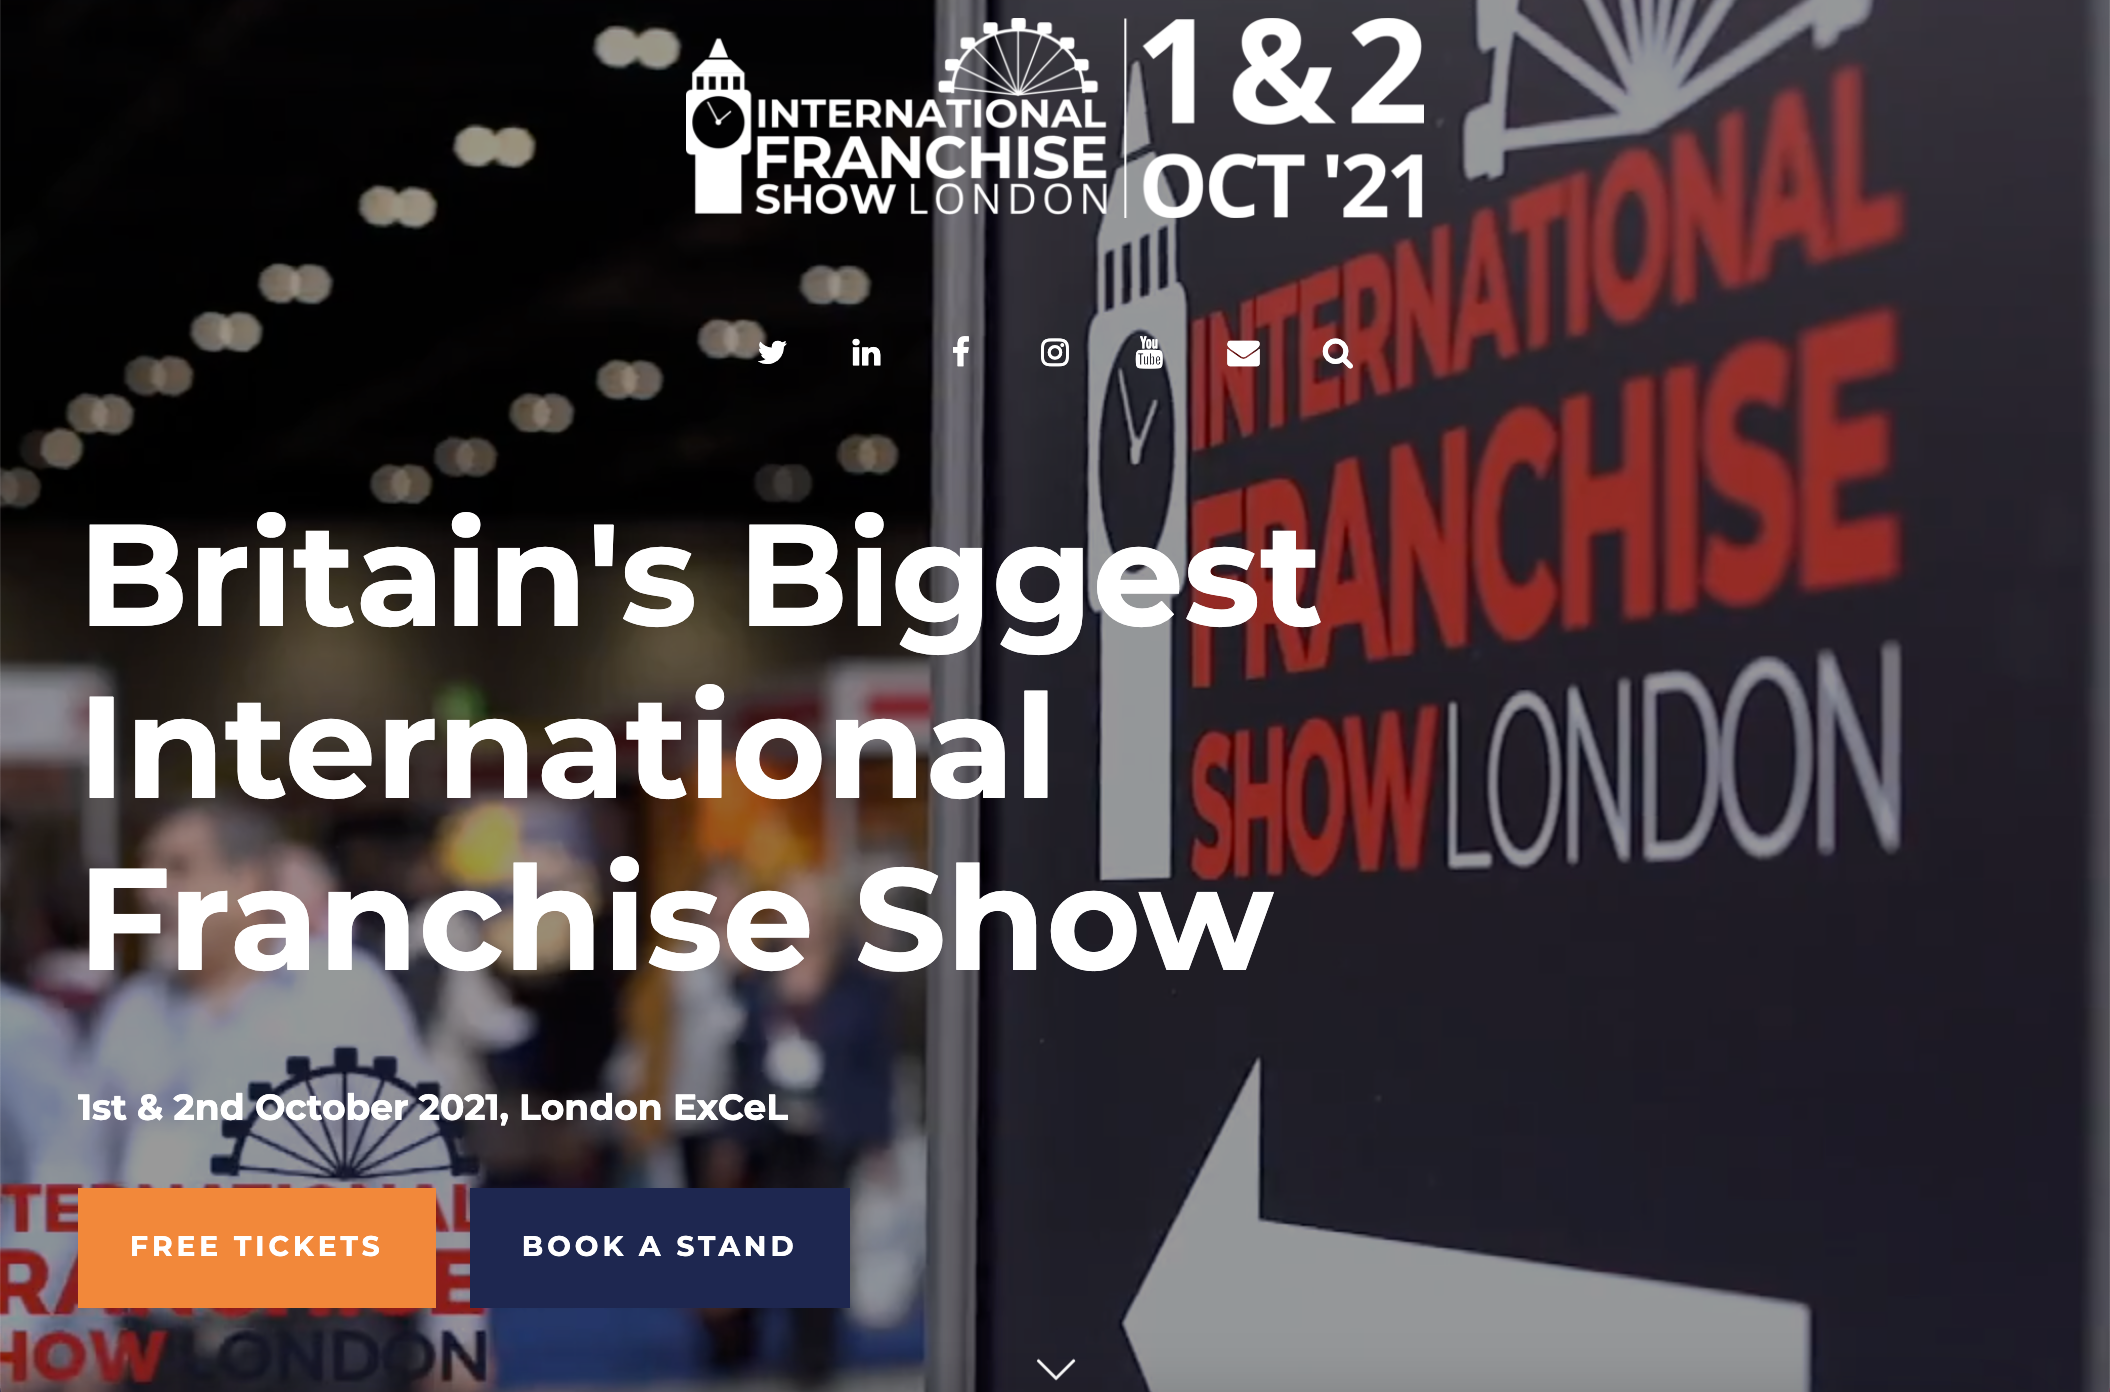 The International Franchise Show gets a fresh look